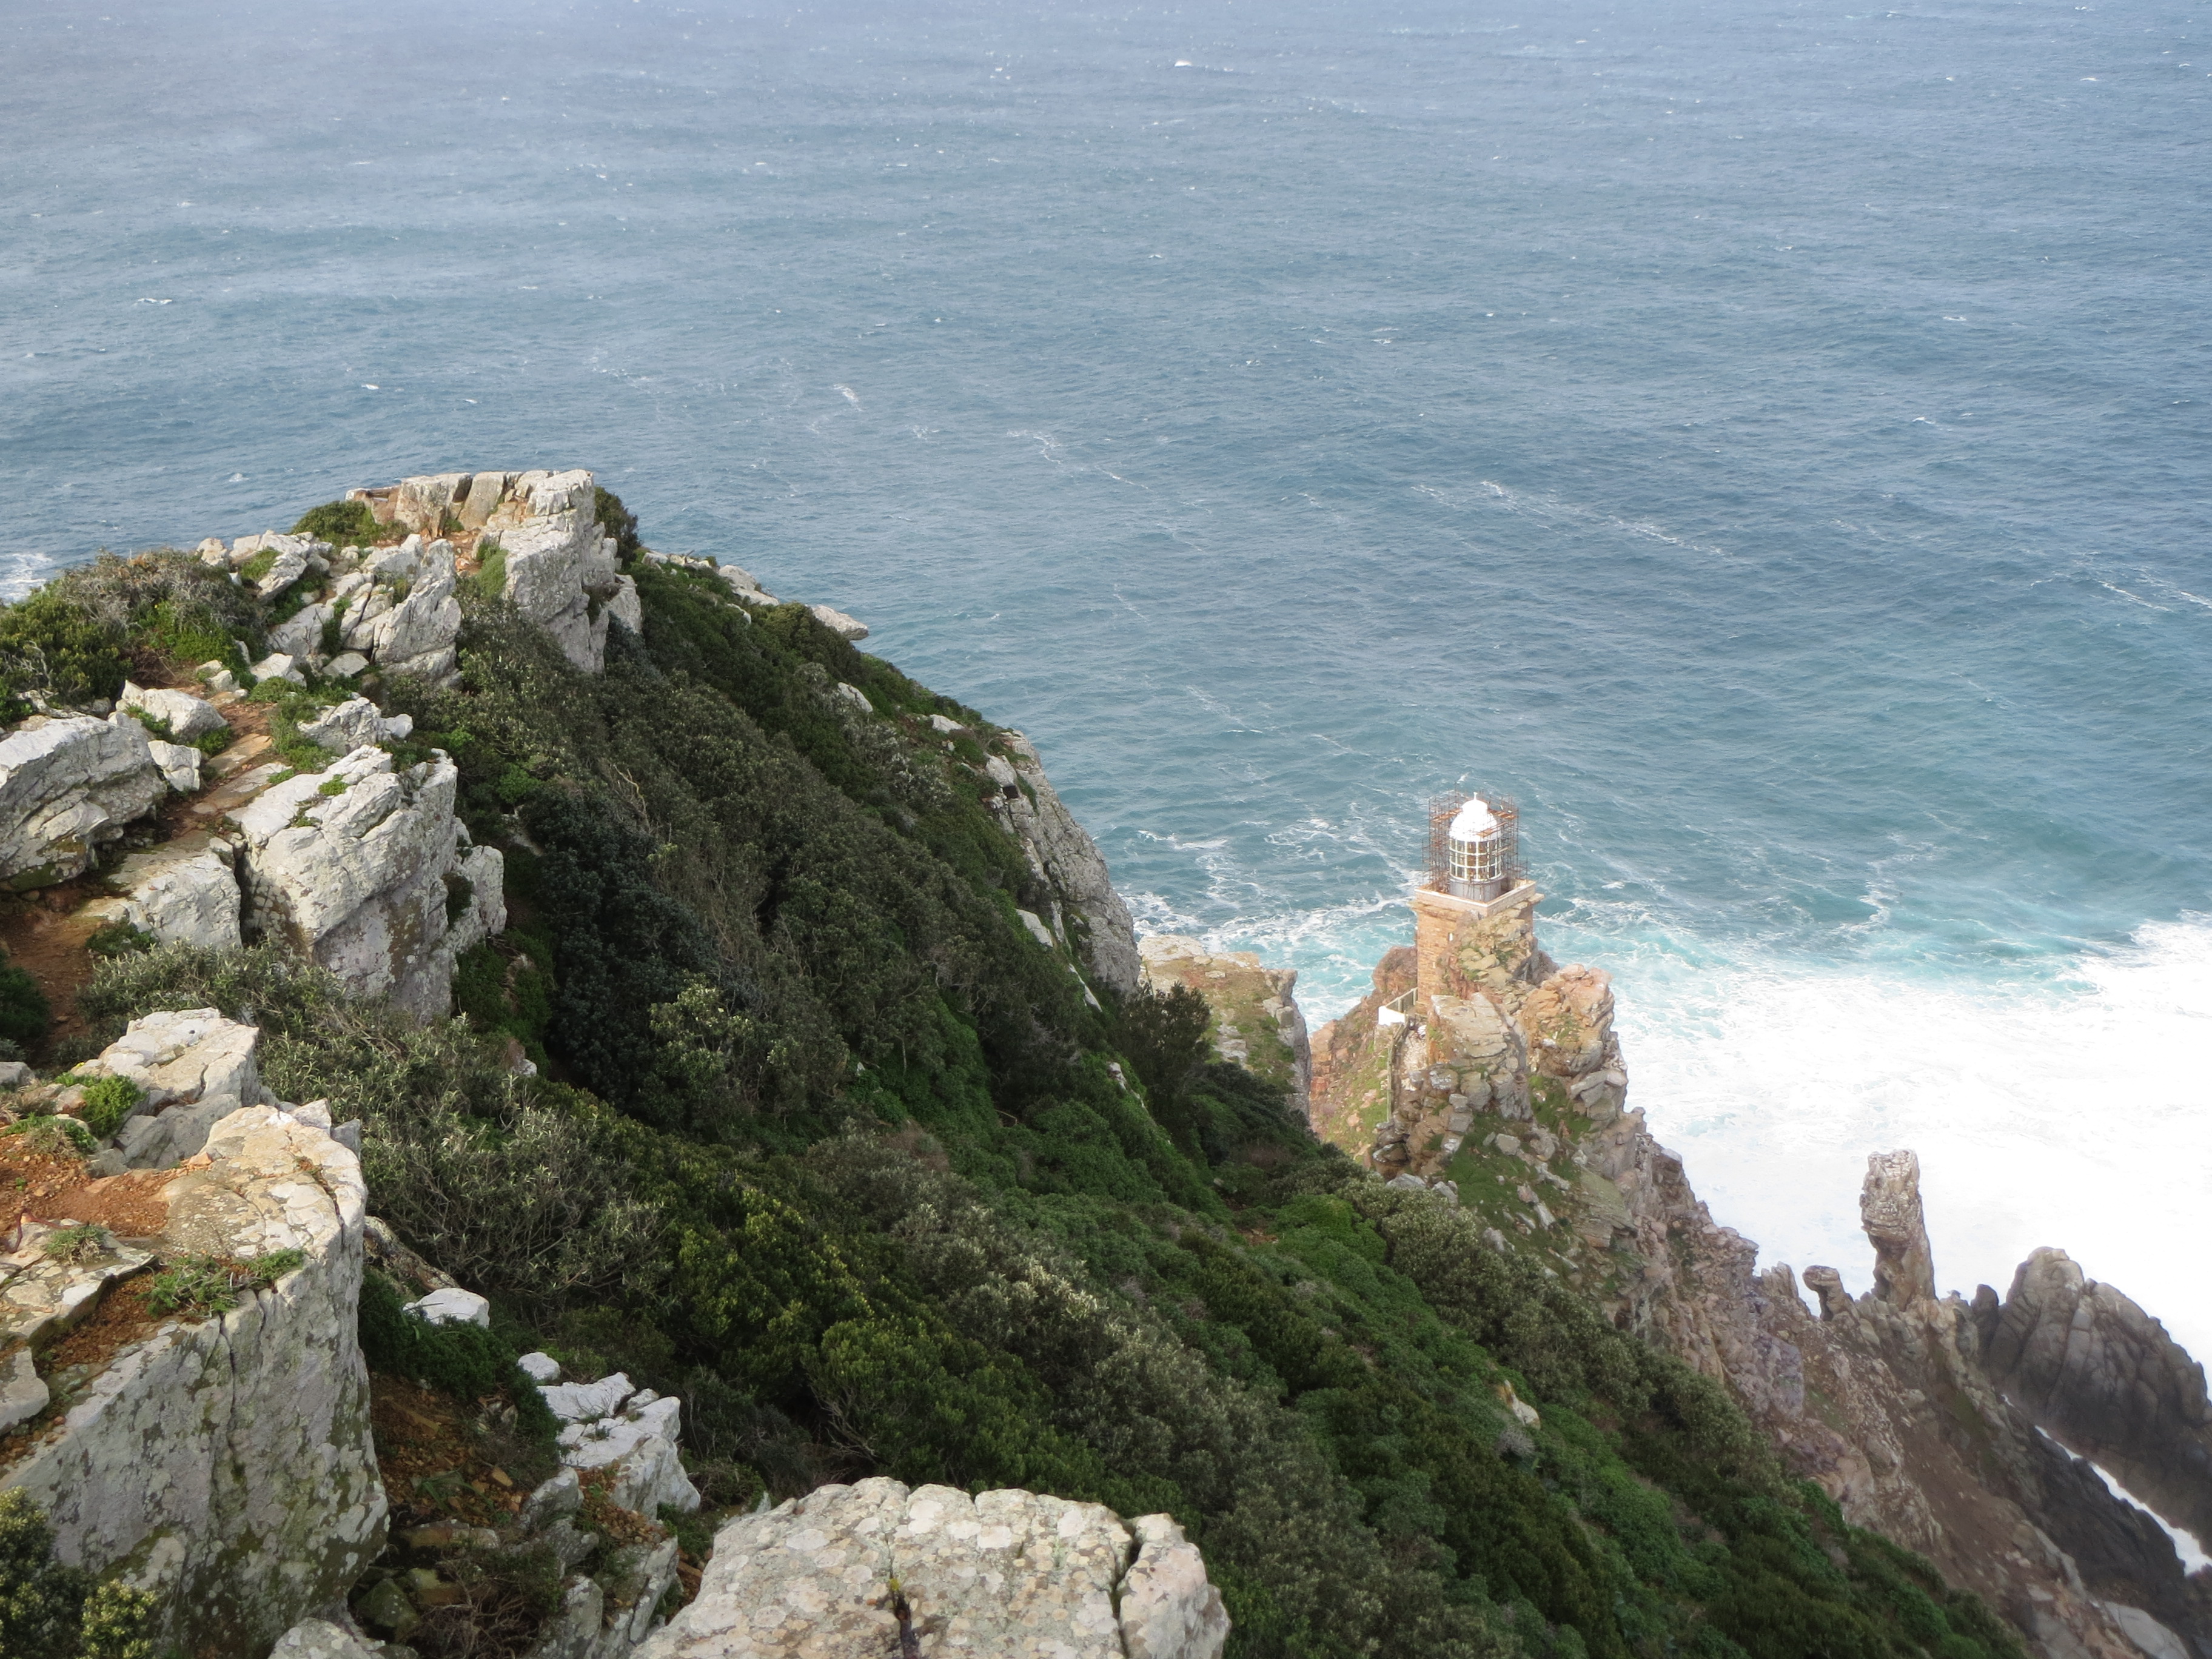 View from the cliff, Cape Point, South Africa. Photo: Francis de los Reyes (after liquid discharge) 